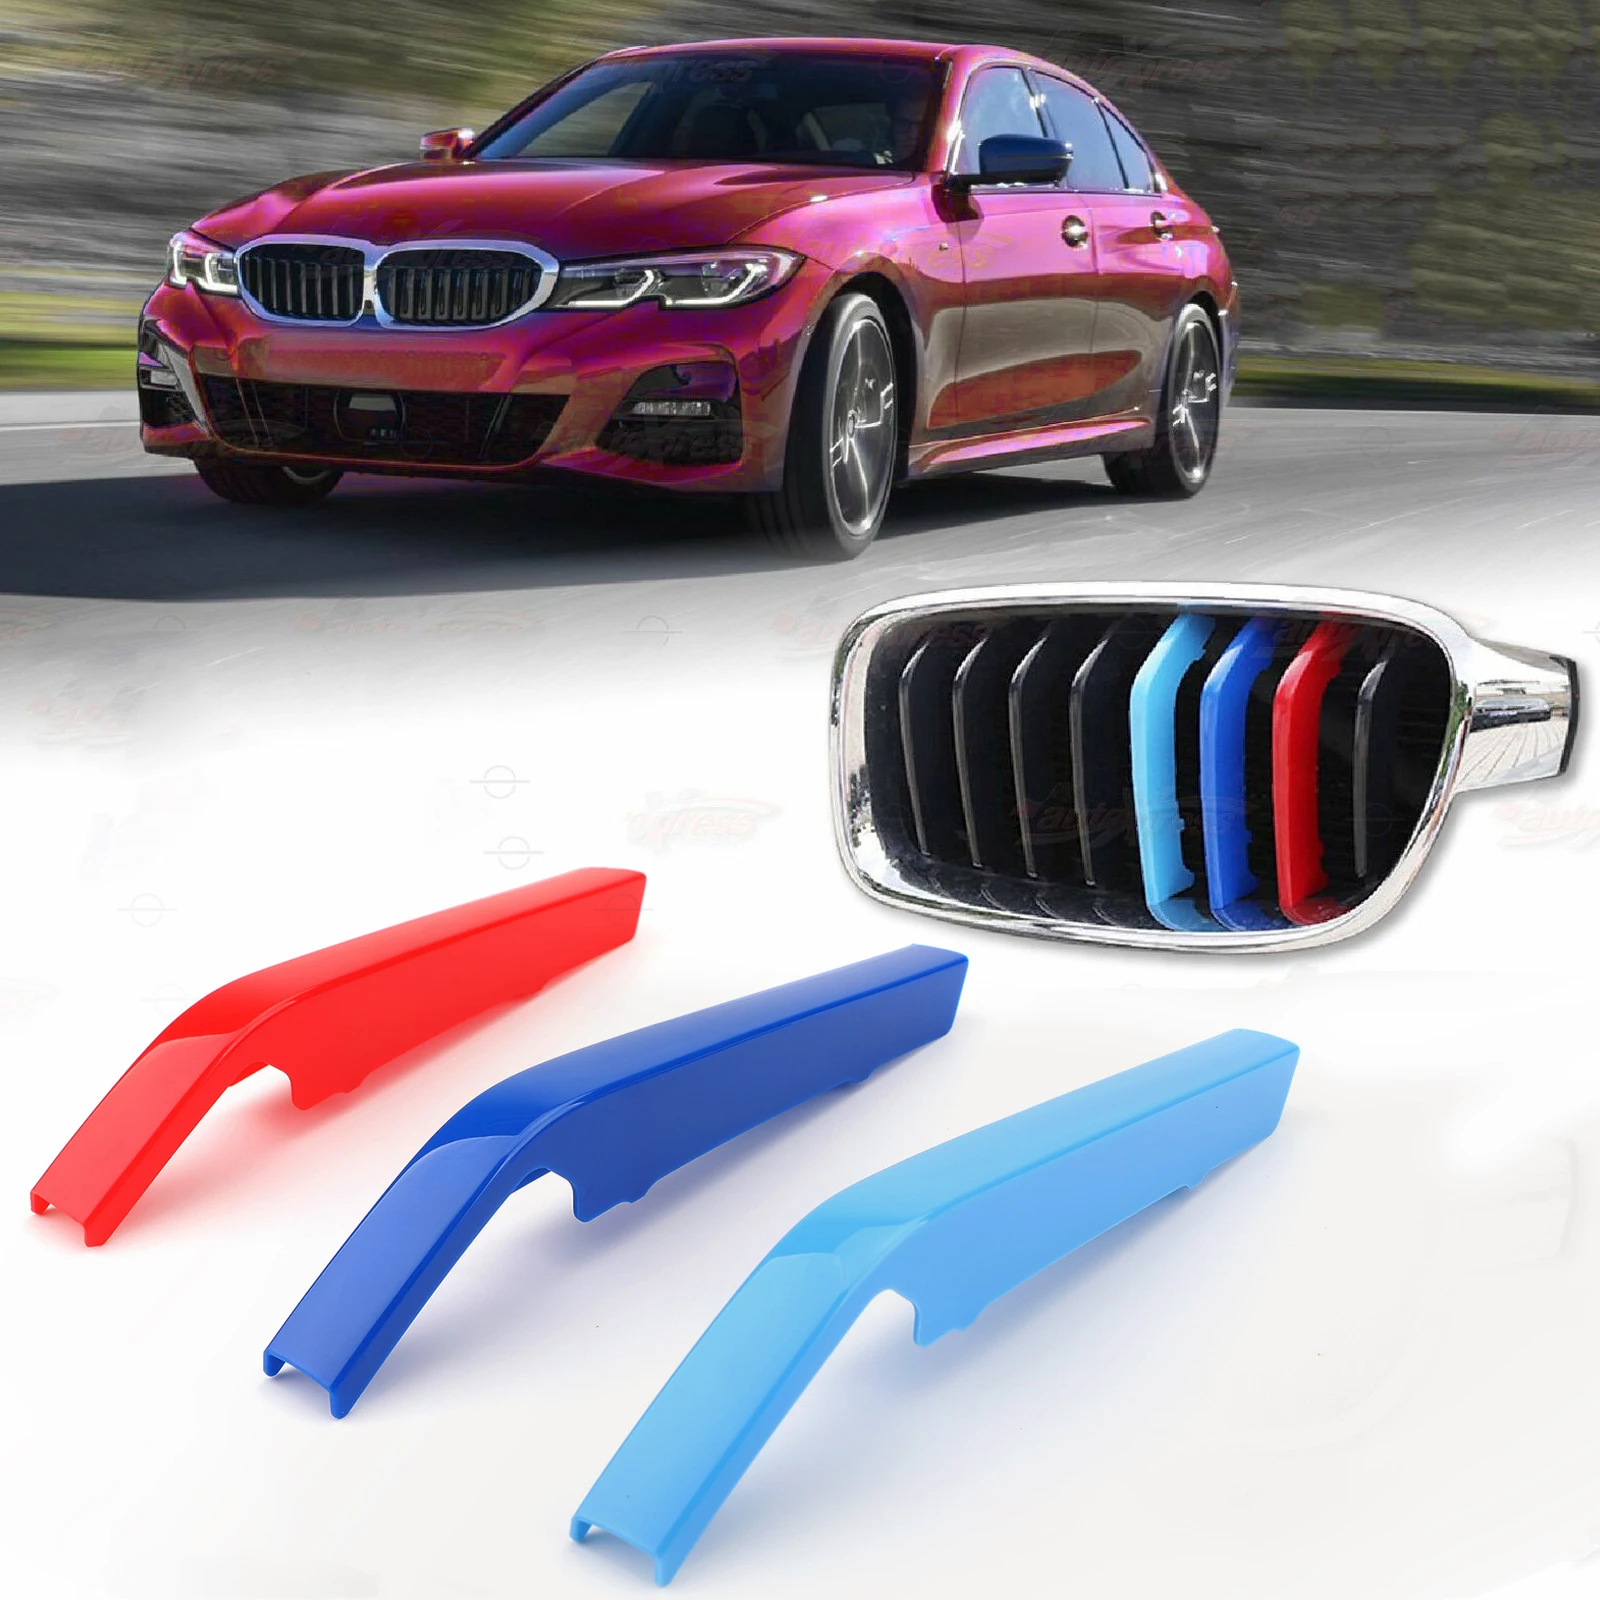 Areyourshop Kidney Grille M Sport 3Colour Cover Stripe Clips For BMW 3 Series G20 2019&up Car Grille Tricolor Cover Stripe Clips